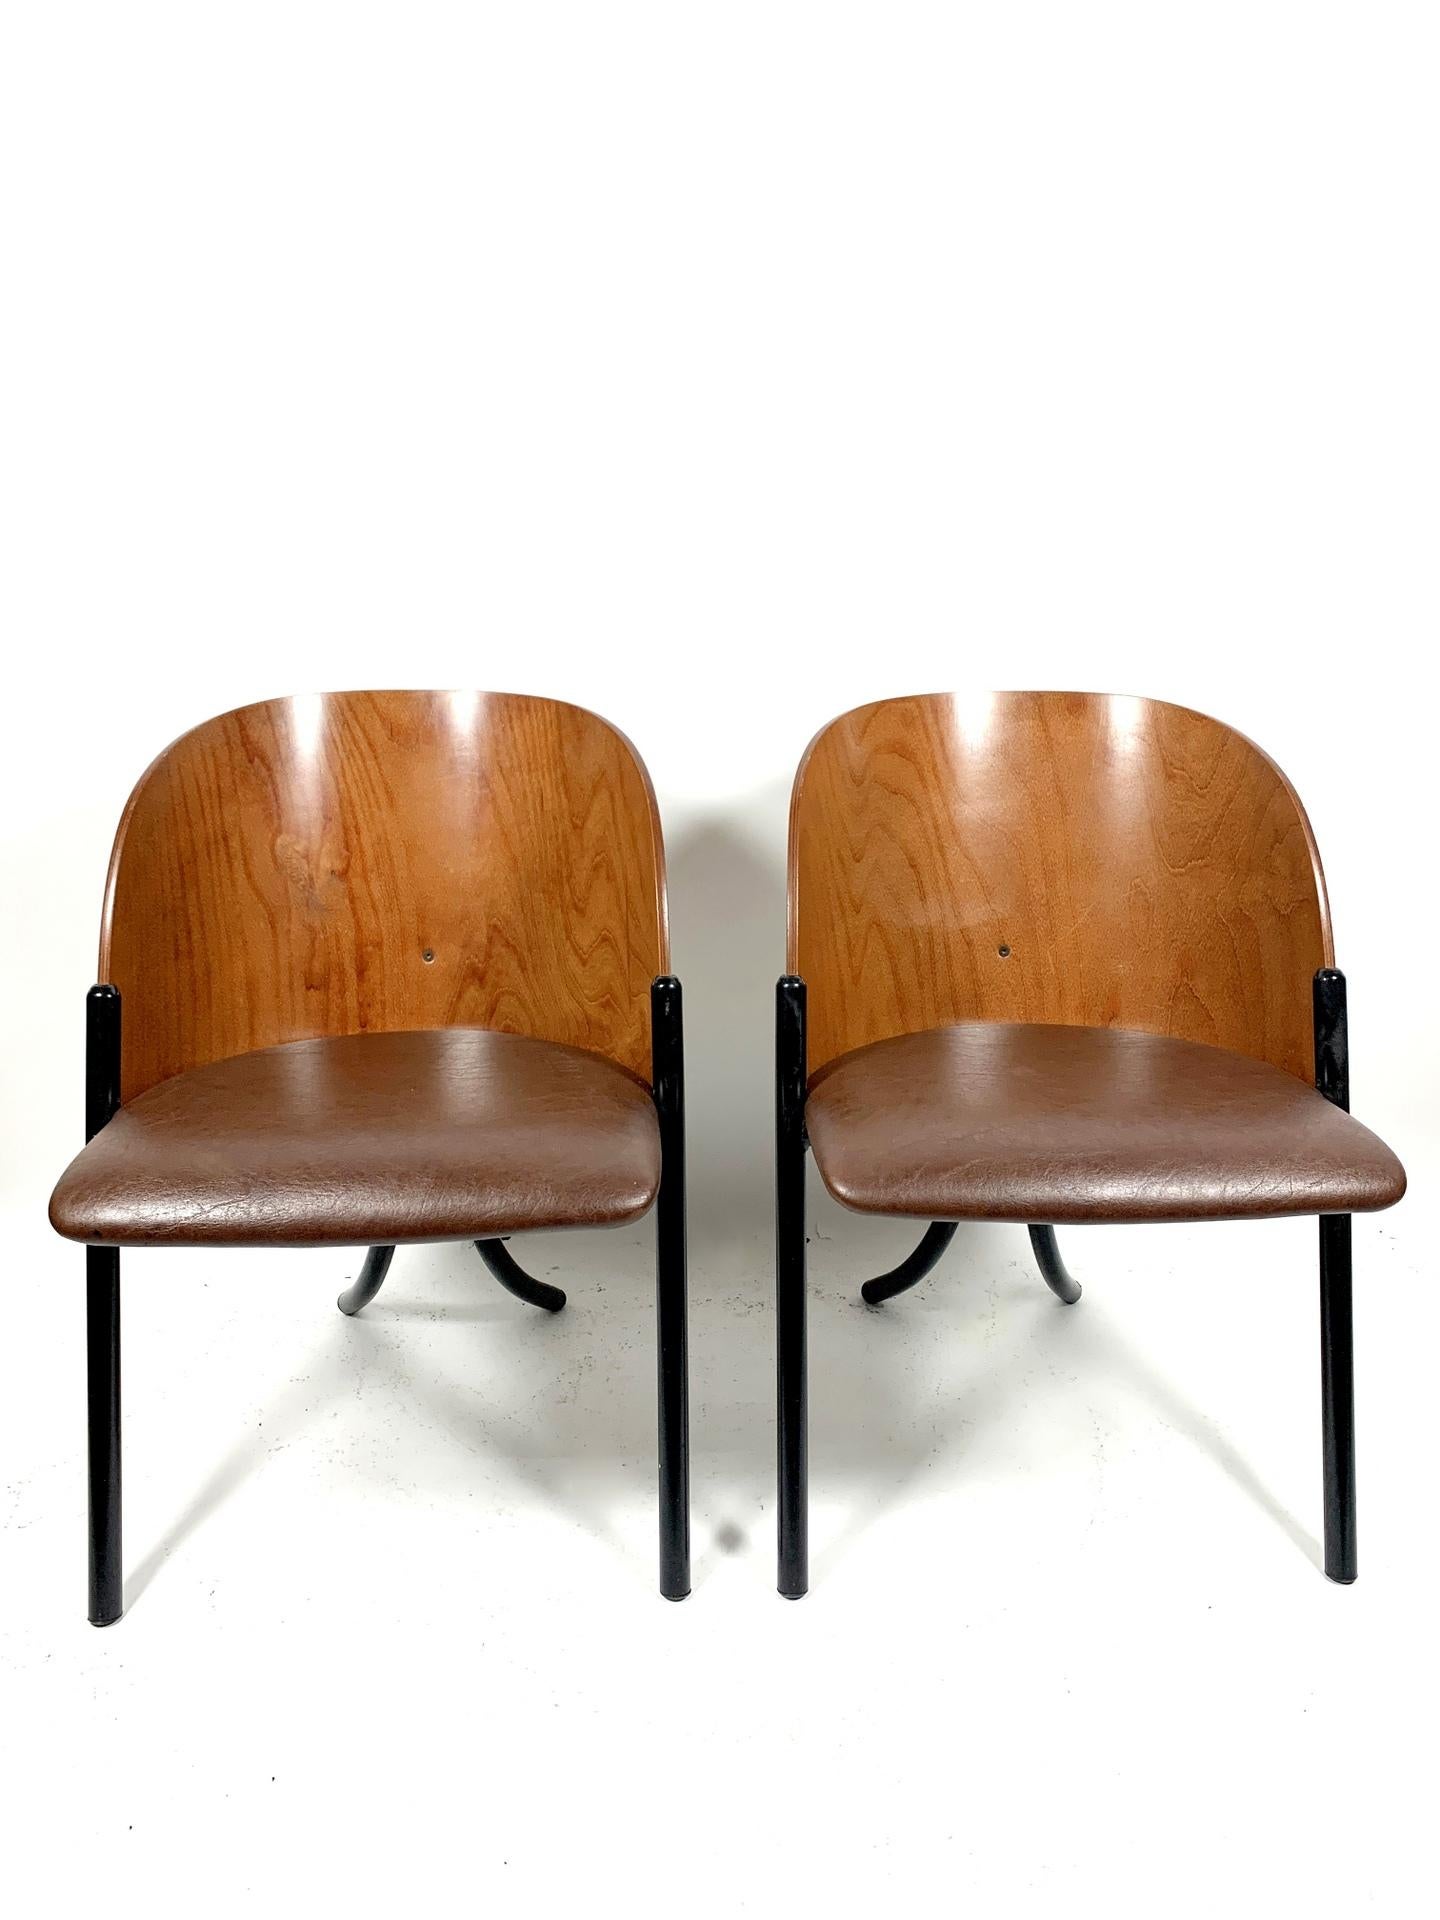 These great looking chairs are made of bentwood and veneer with a leatherette cover- and were made in the 1970s.
       